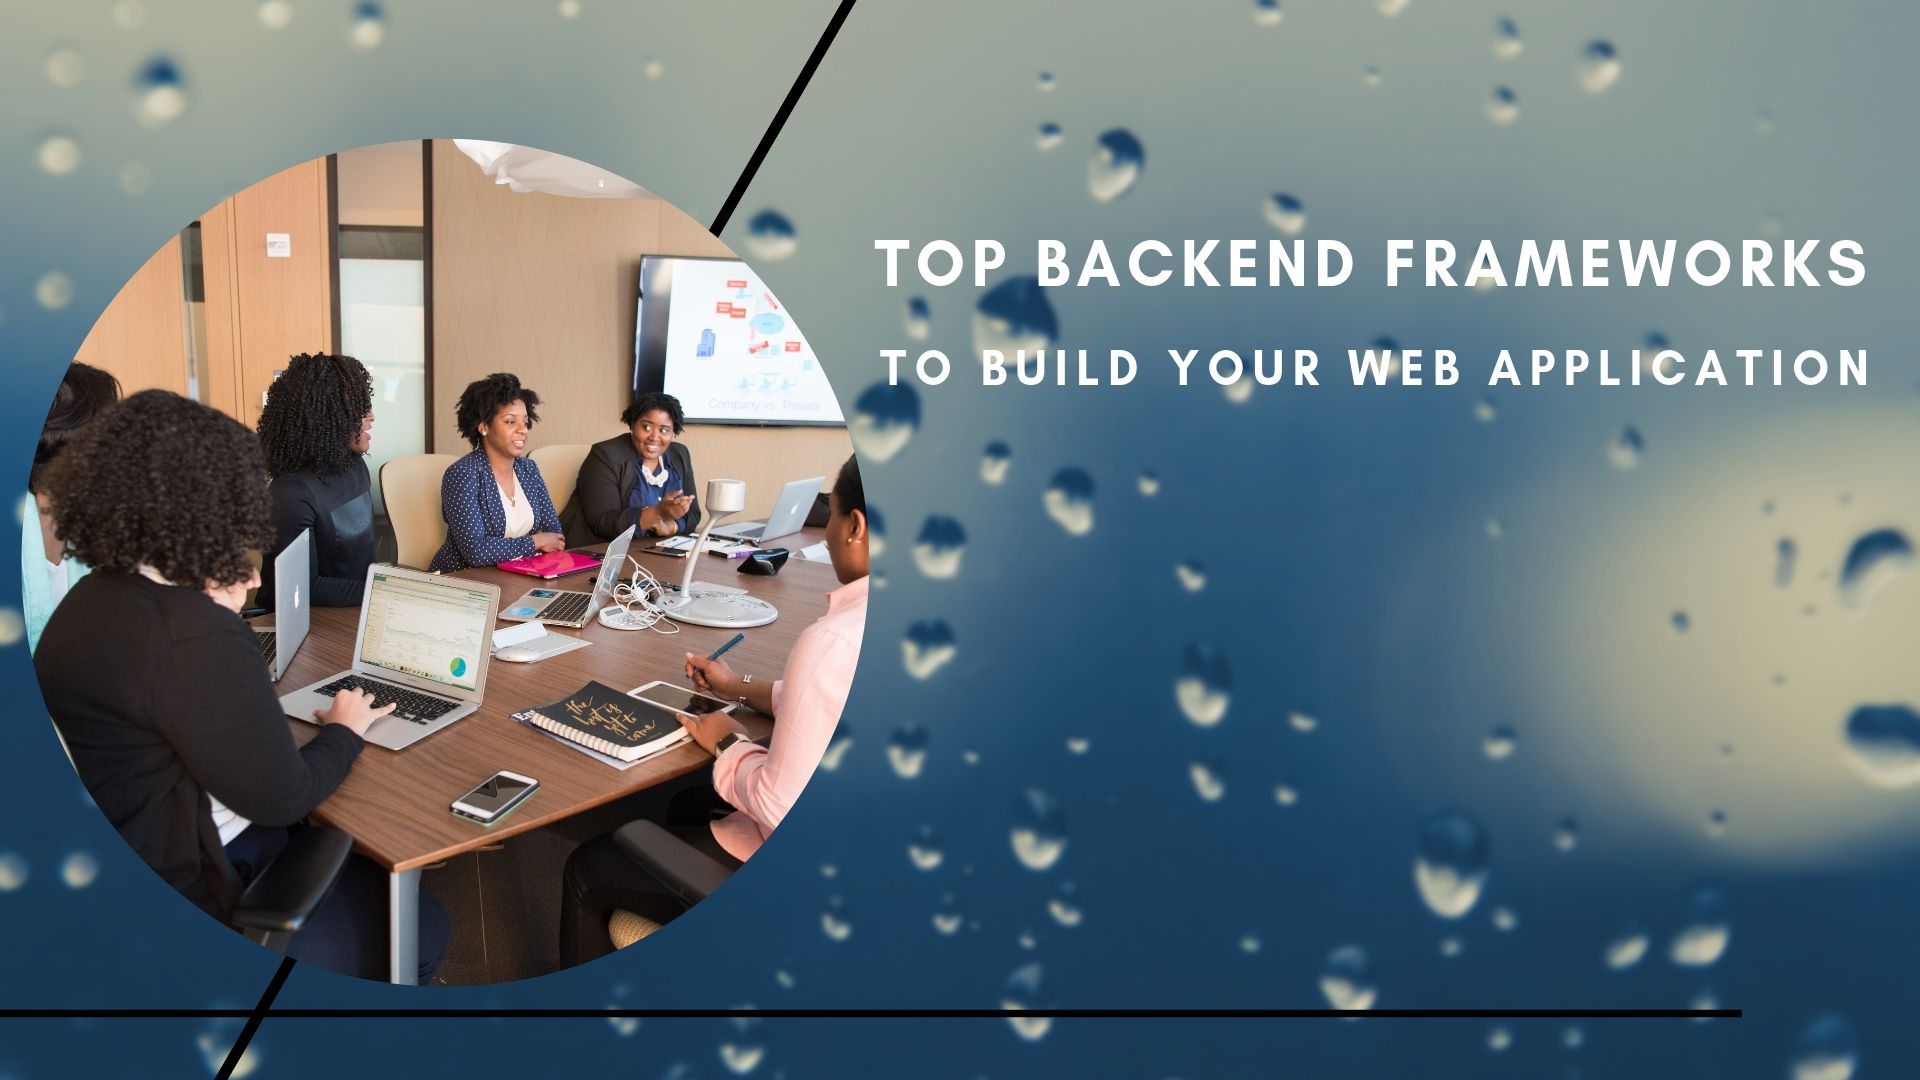 Top Backend Frameworks to Build Your Web Application